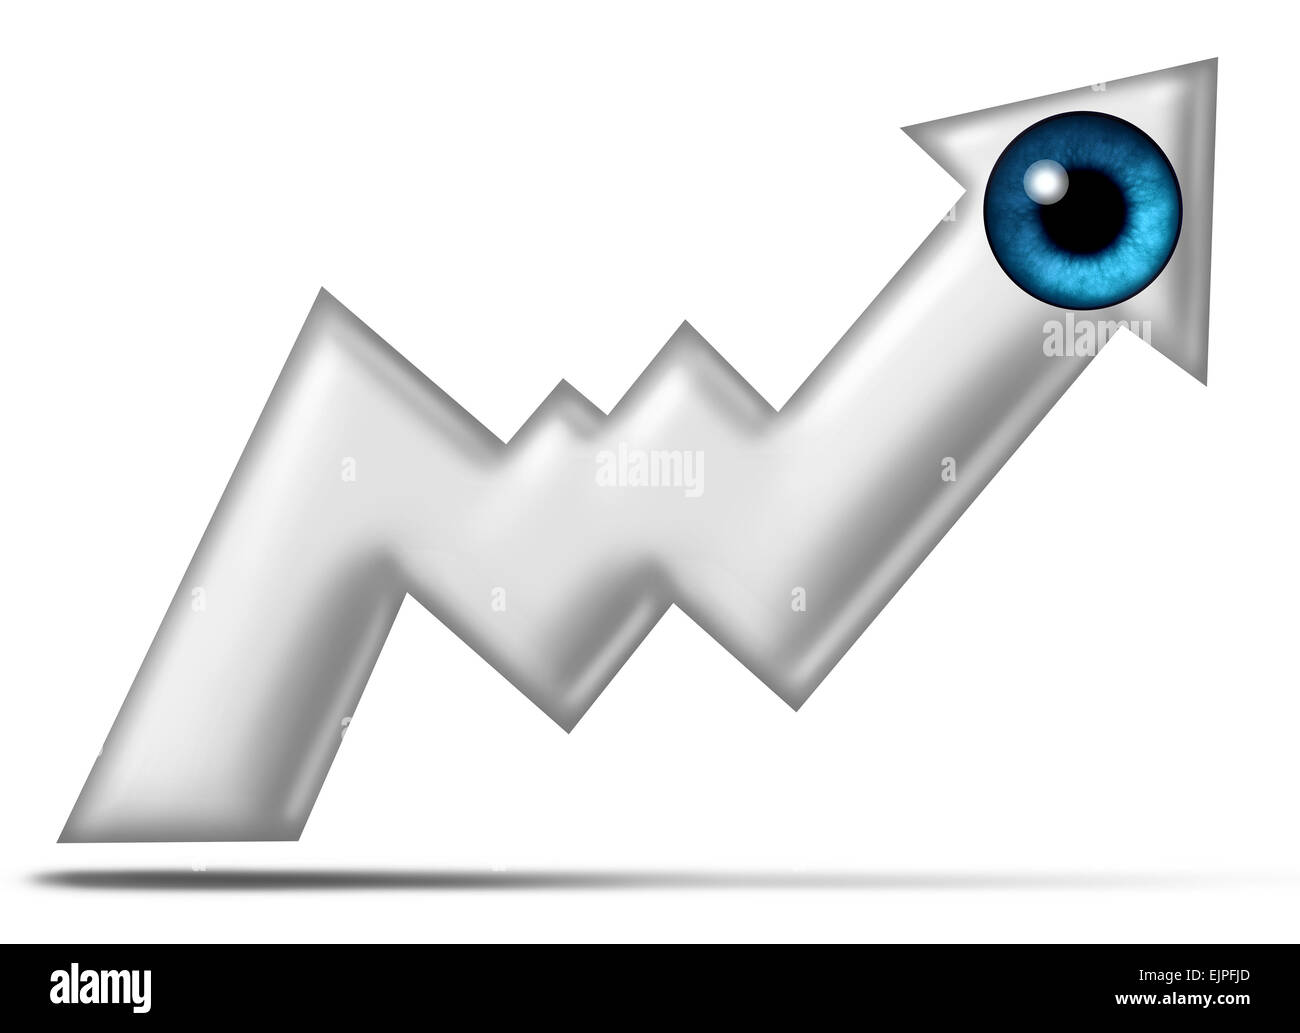 Profit vision looking for the future in finding profitable wealth opportunities as a human eye ball shaped as a financial stock Stock Photo